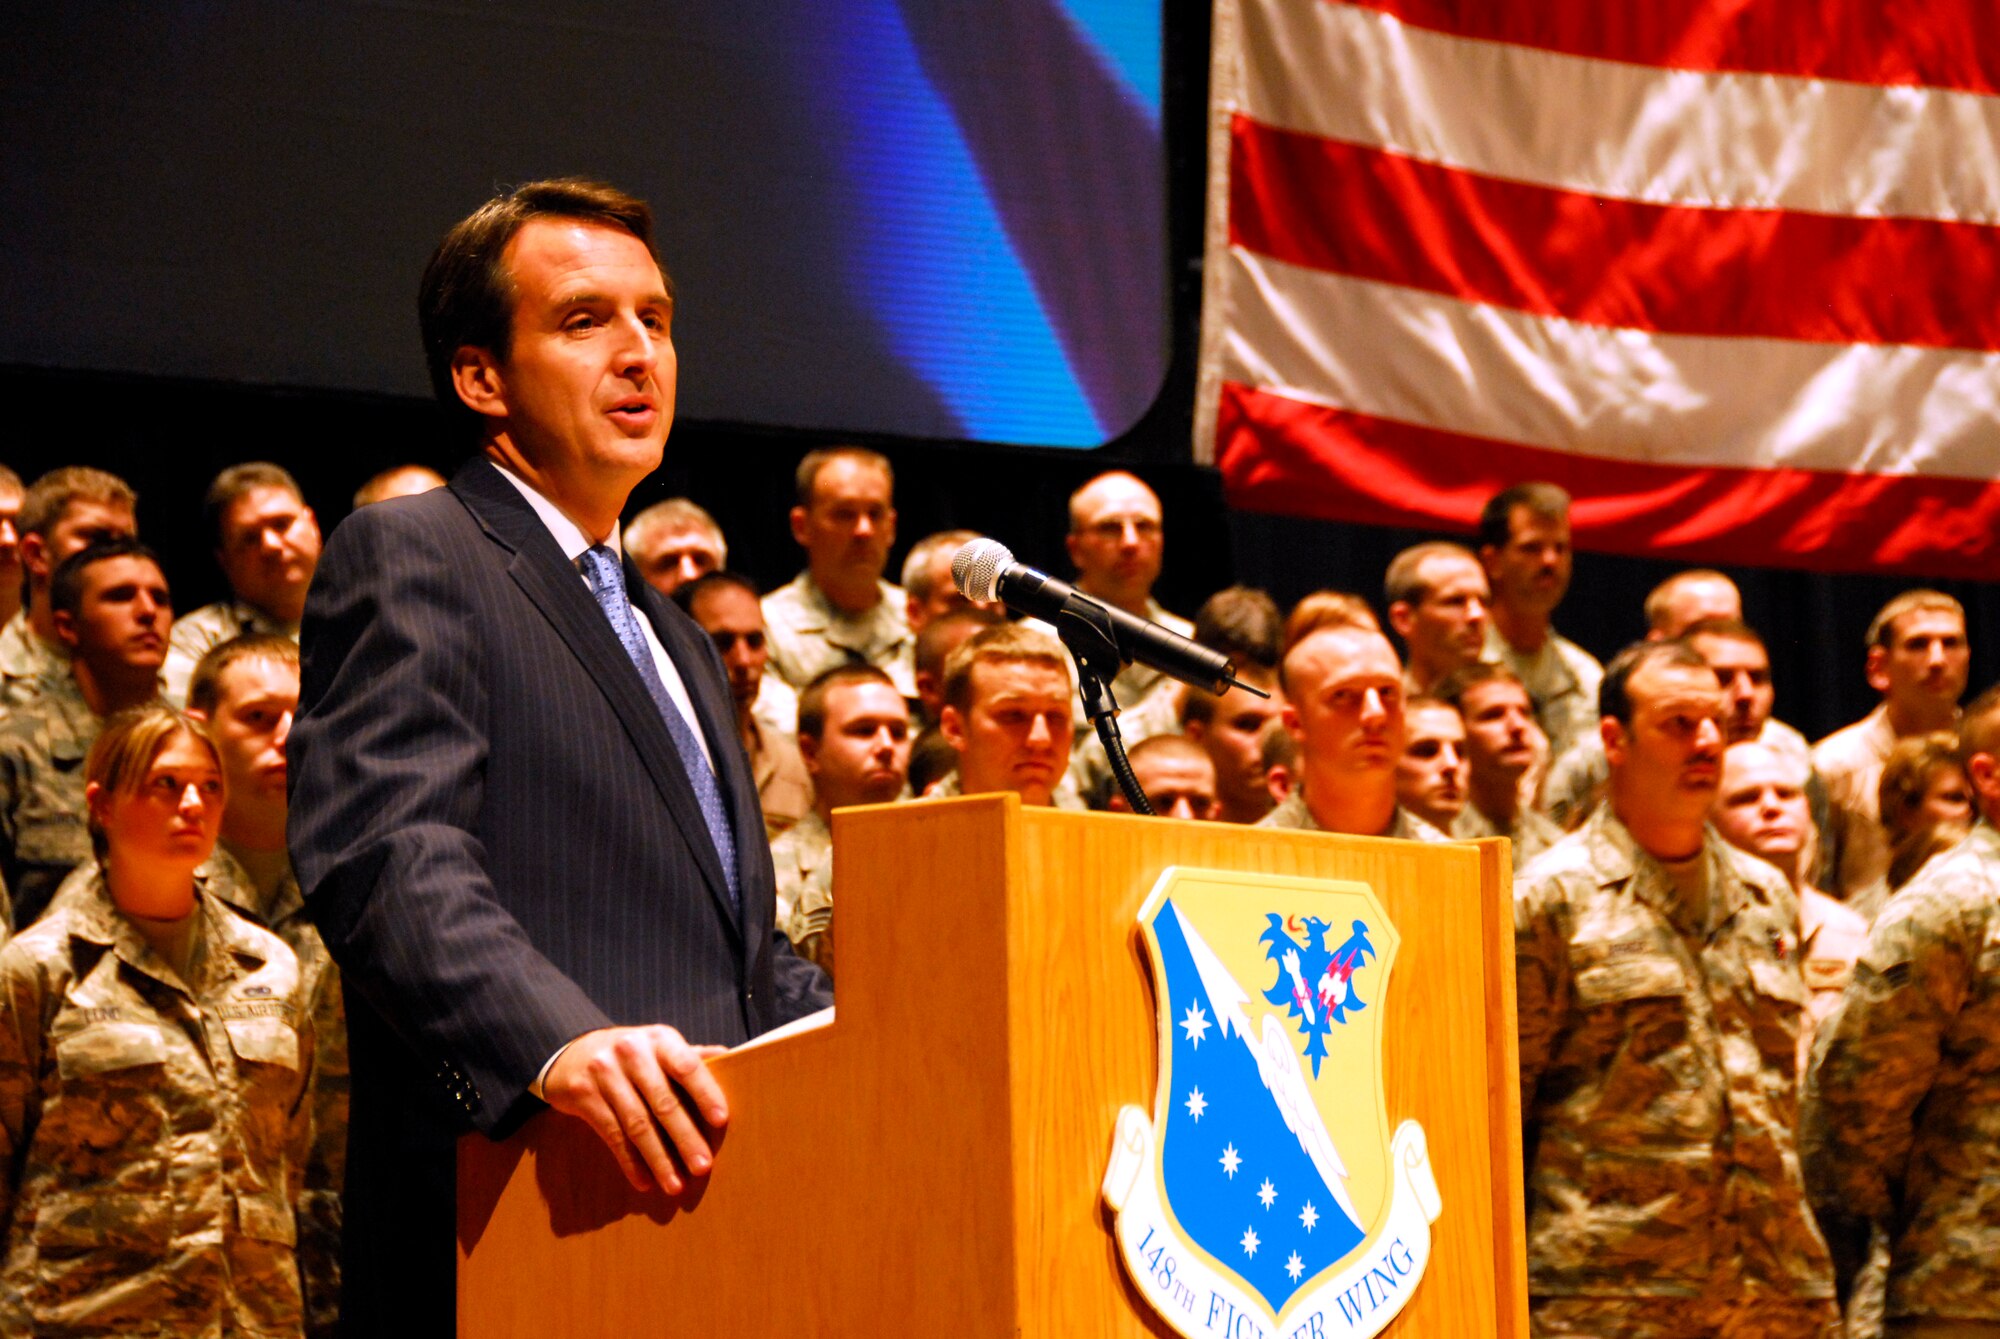 Minnesota Governor Tim Pawlenty speaks during a deployment ceremony for the 148th Fighter Wing based in Duluth, Minn. at the Duluth Entertainment and Convention Center Nov. 2, 2008.  Approximately 300 148th Fighter Wing members will deploy overseas in support of Operation Iraqi Freedom and/or Operation Enduring Freedom between Sept 2008 and Jan 2009. (U.S. Air Force photo by SSgt Donald L. Acton) (Released)